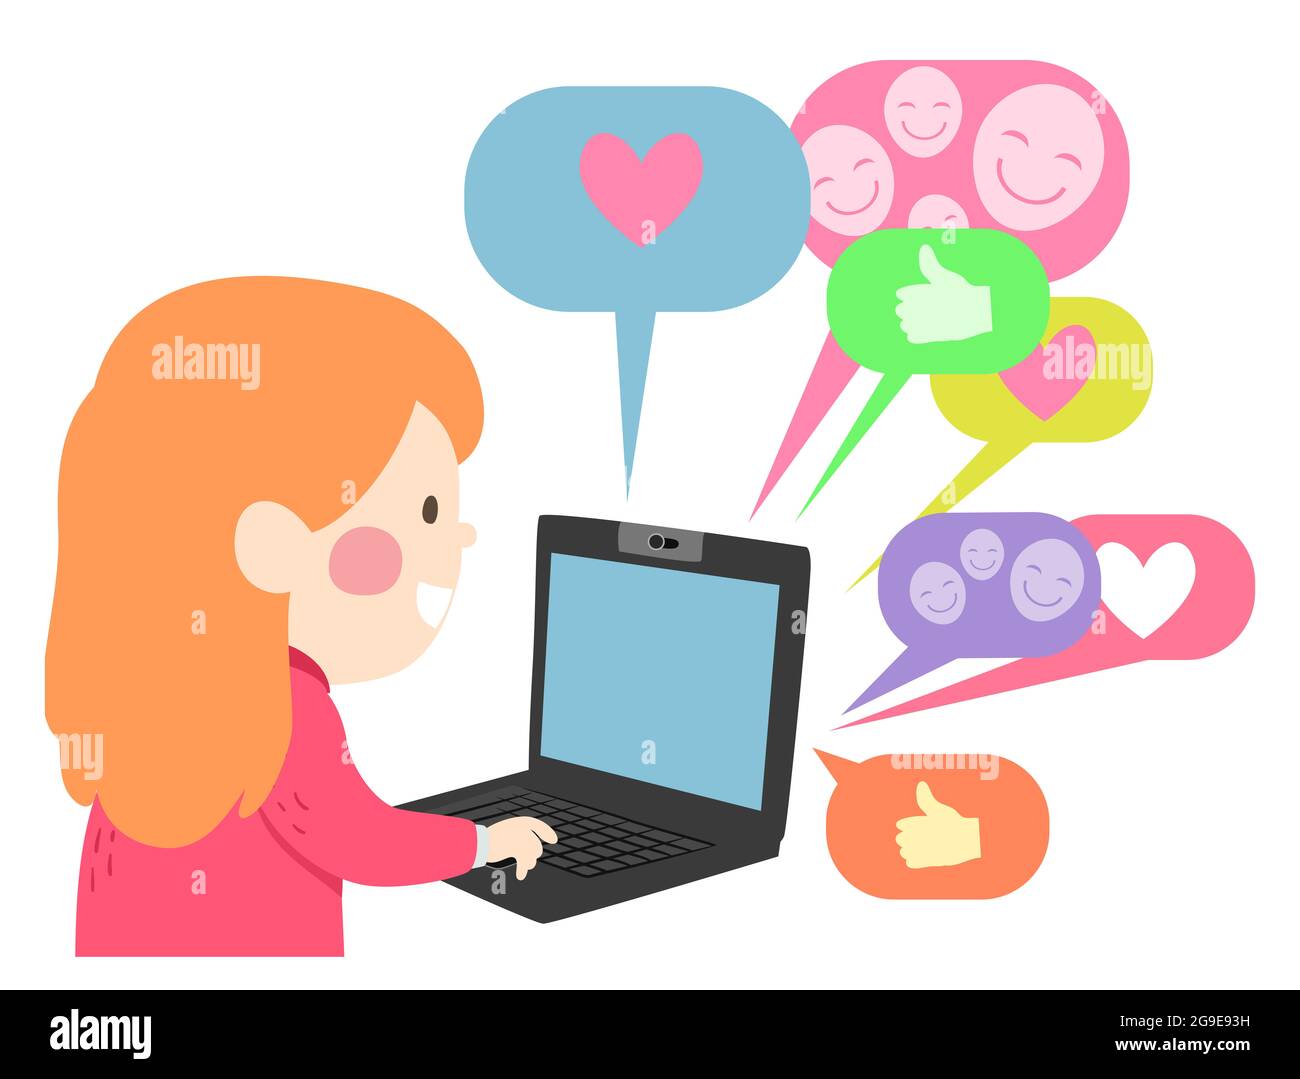 Illustration of a Kid Girl Using the Laptop on Internet Receiving Compliments in Social Media Stock Photo